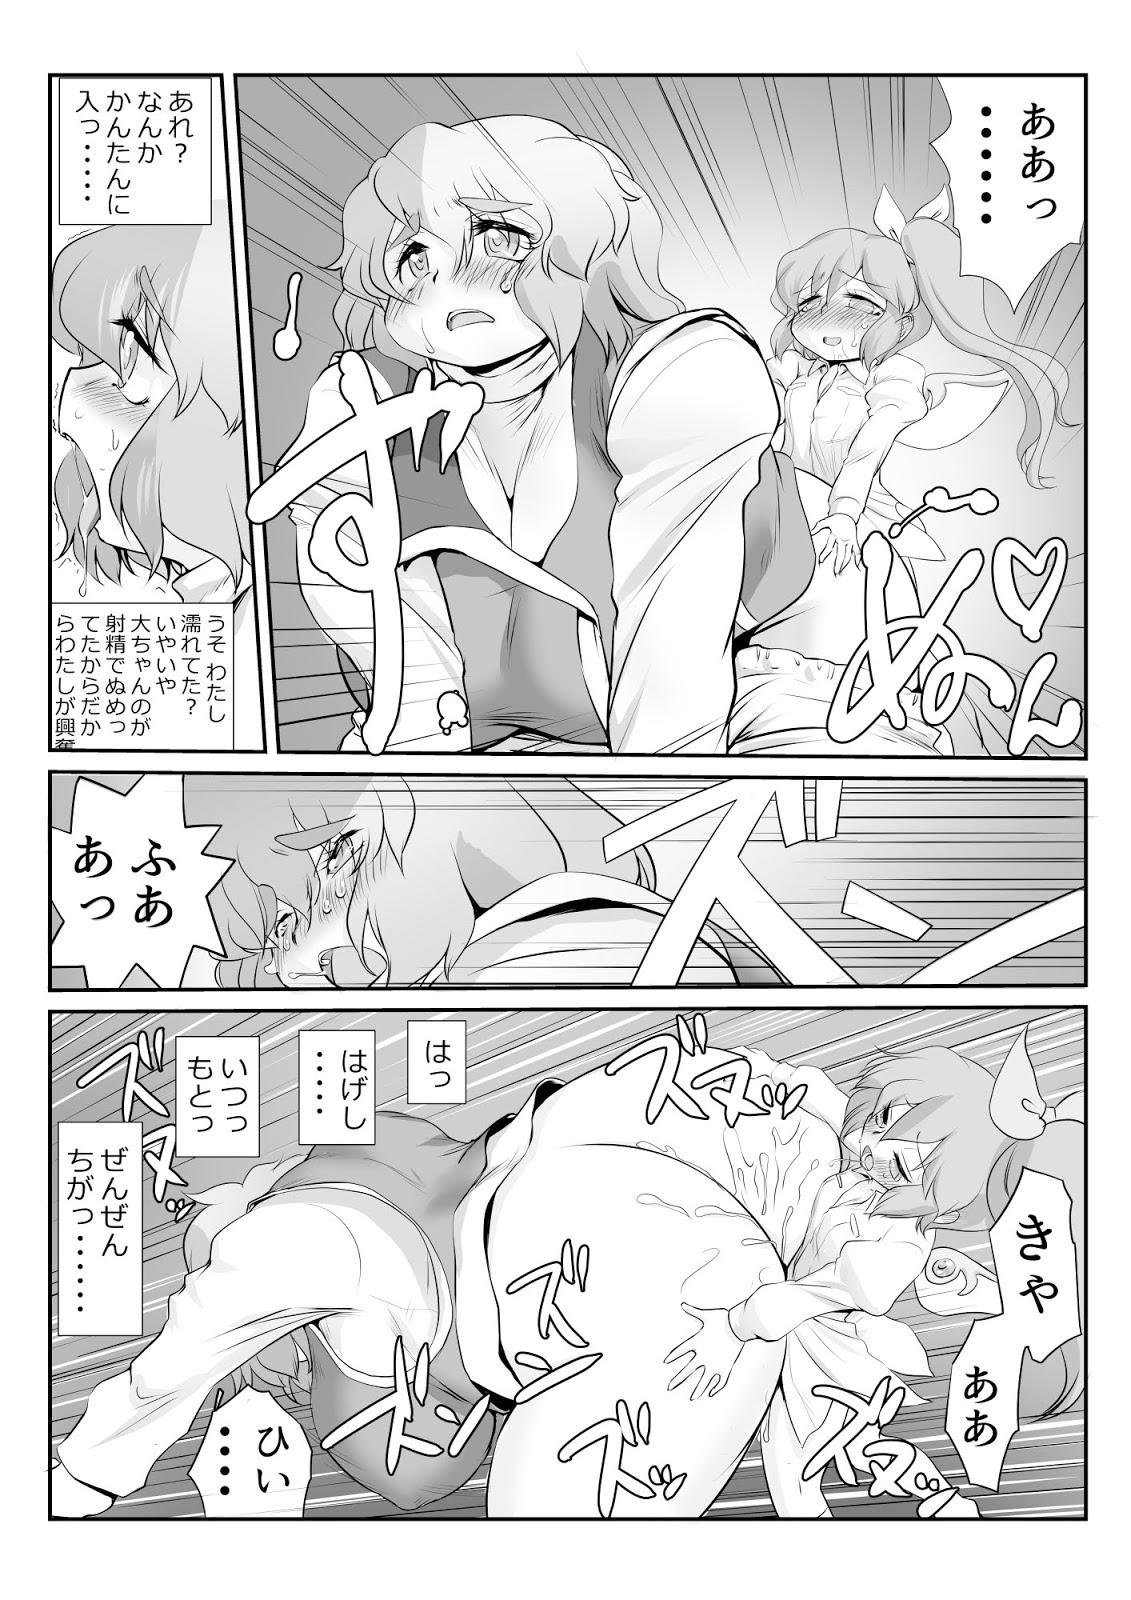 Outdoor Touhou Pragmatizer 26 - Lunate Fairy - Touhou project Japanese - Page 10